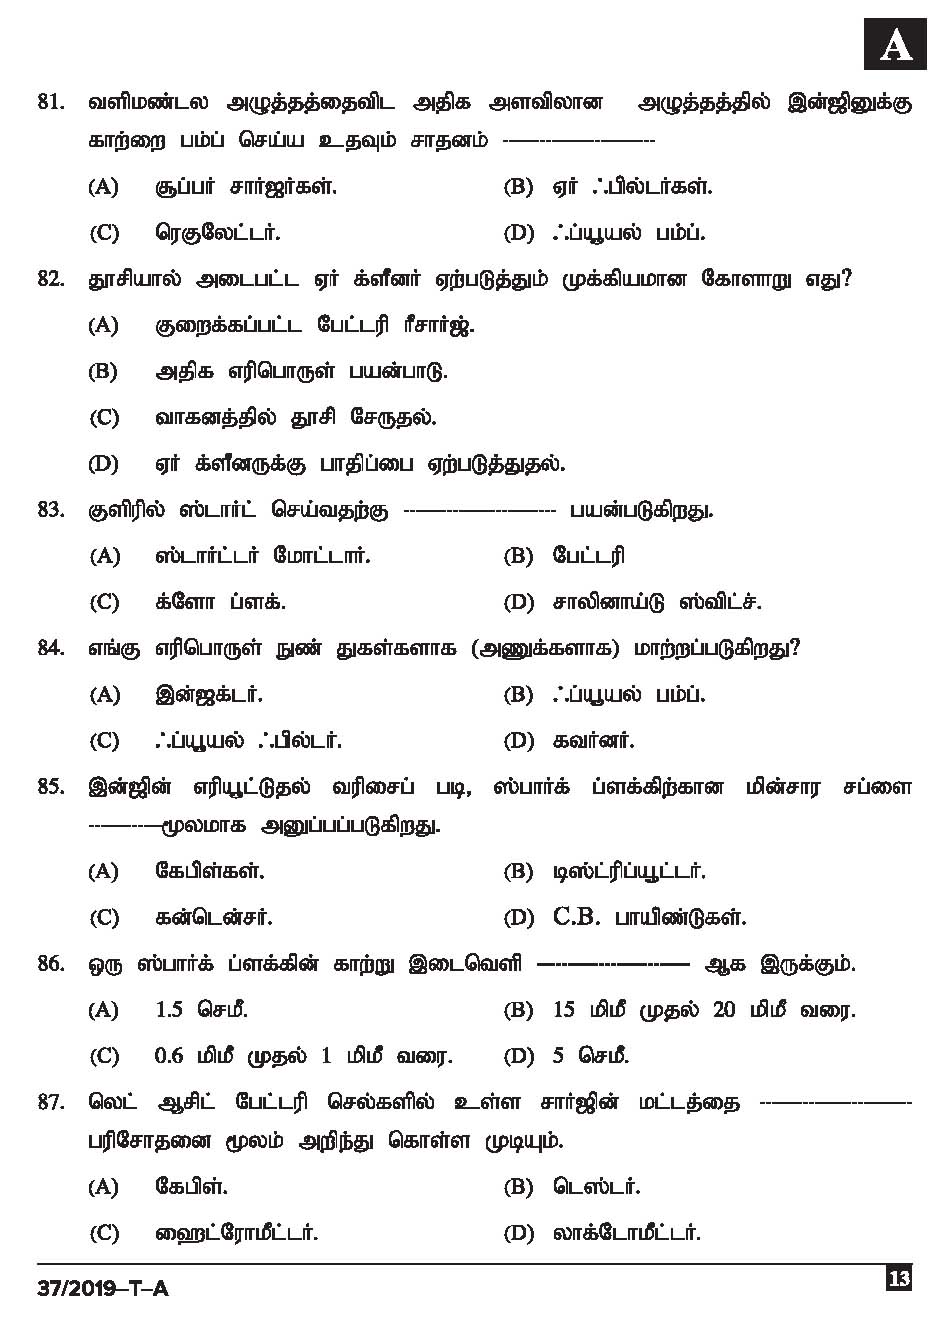 KPSC Driver and Office Attendant Tamil Exam 2019 Code 372019 T 12